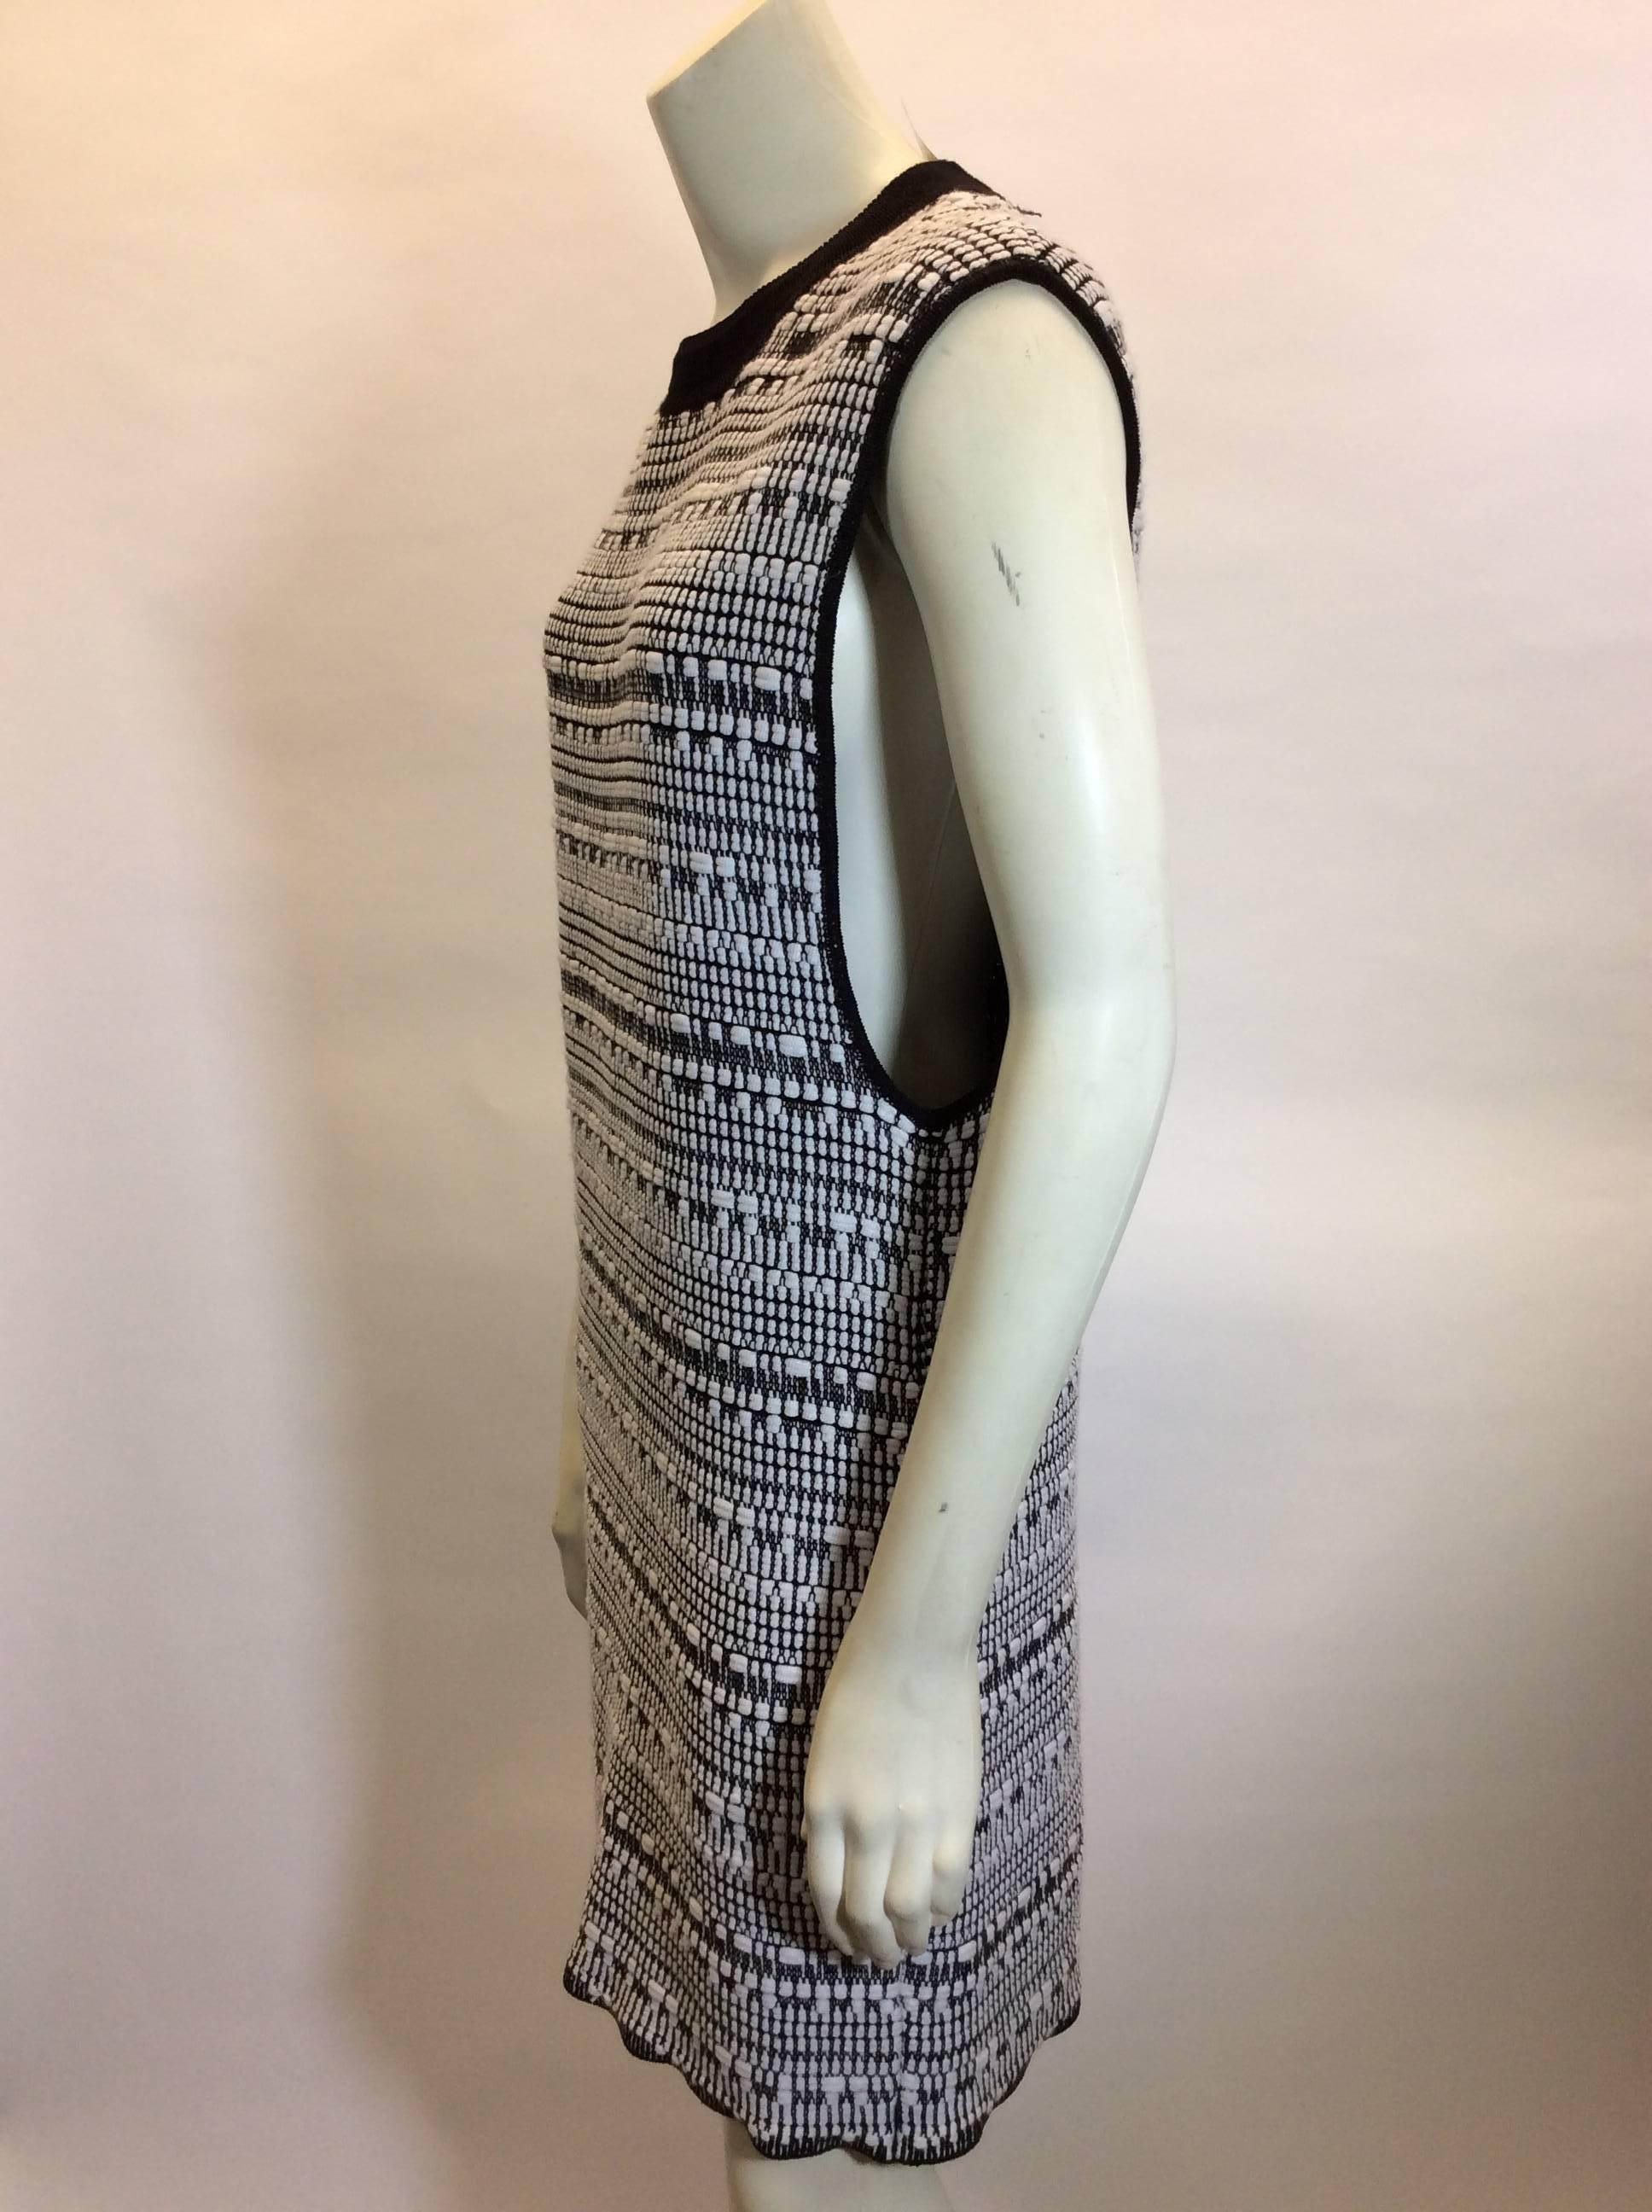 Helmut Lang Sweater Dress
Black and white
Sleeveless, wide opening for arms
Linen & Viscose
Made in China